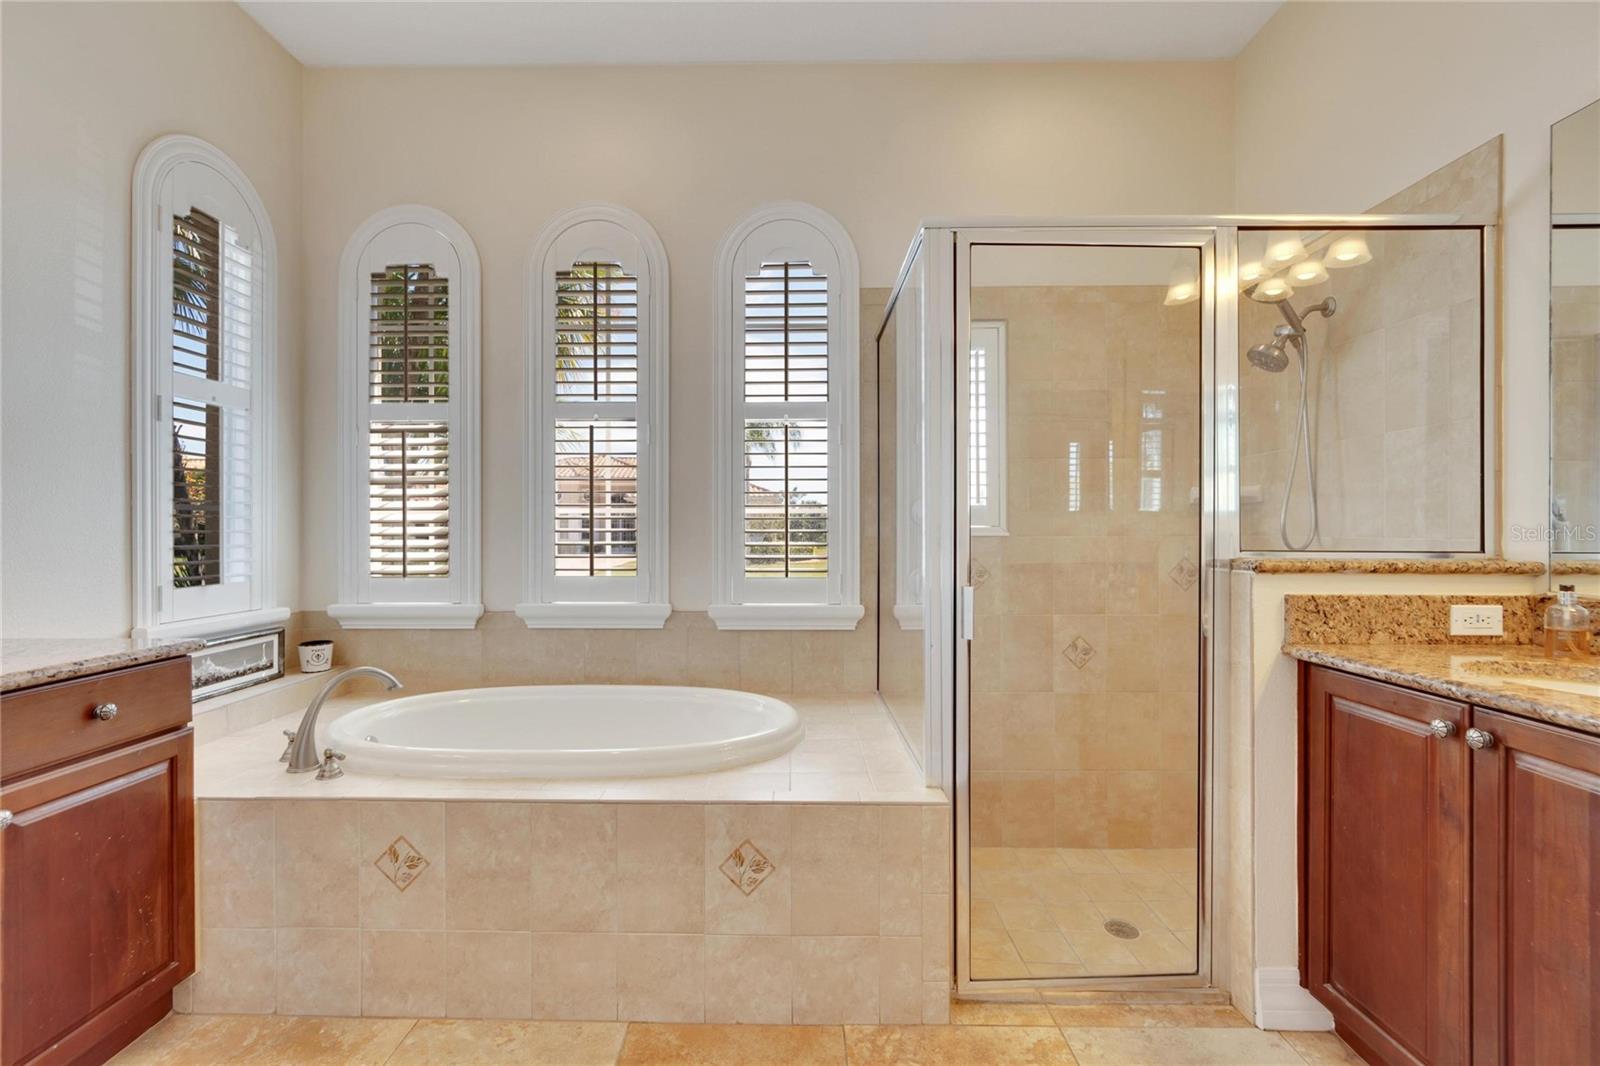 Owner's ensuite is visually stunning with the quad set of arched windows with plantation shutters.